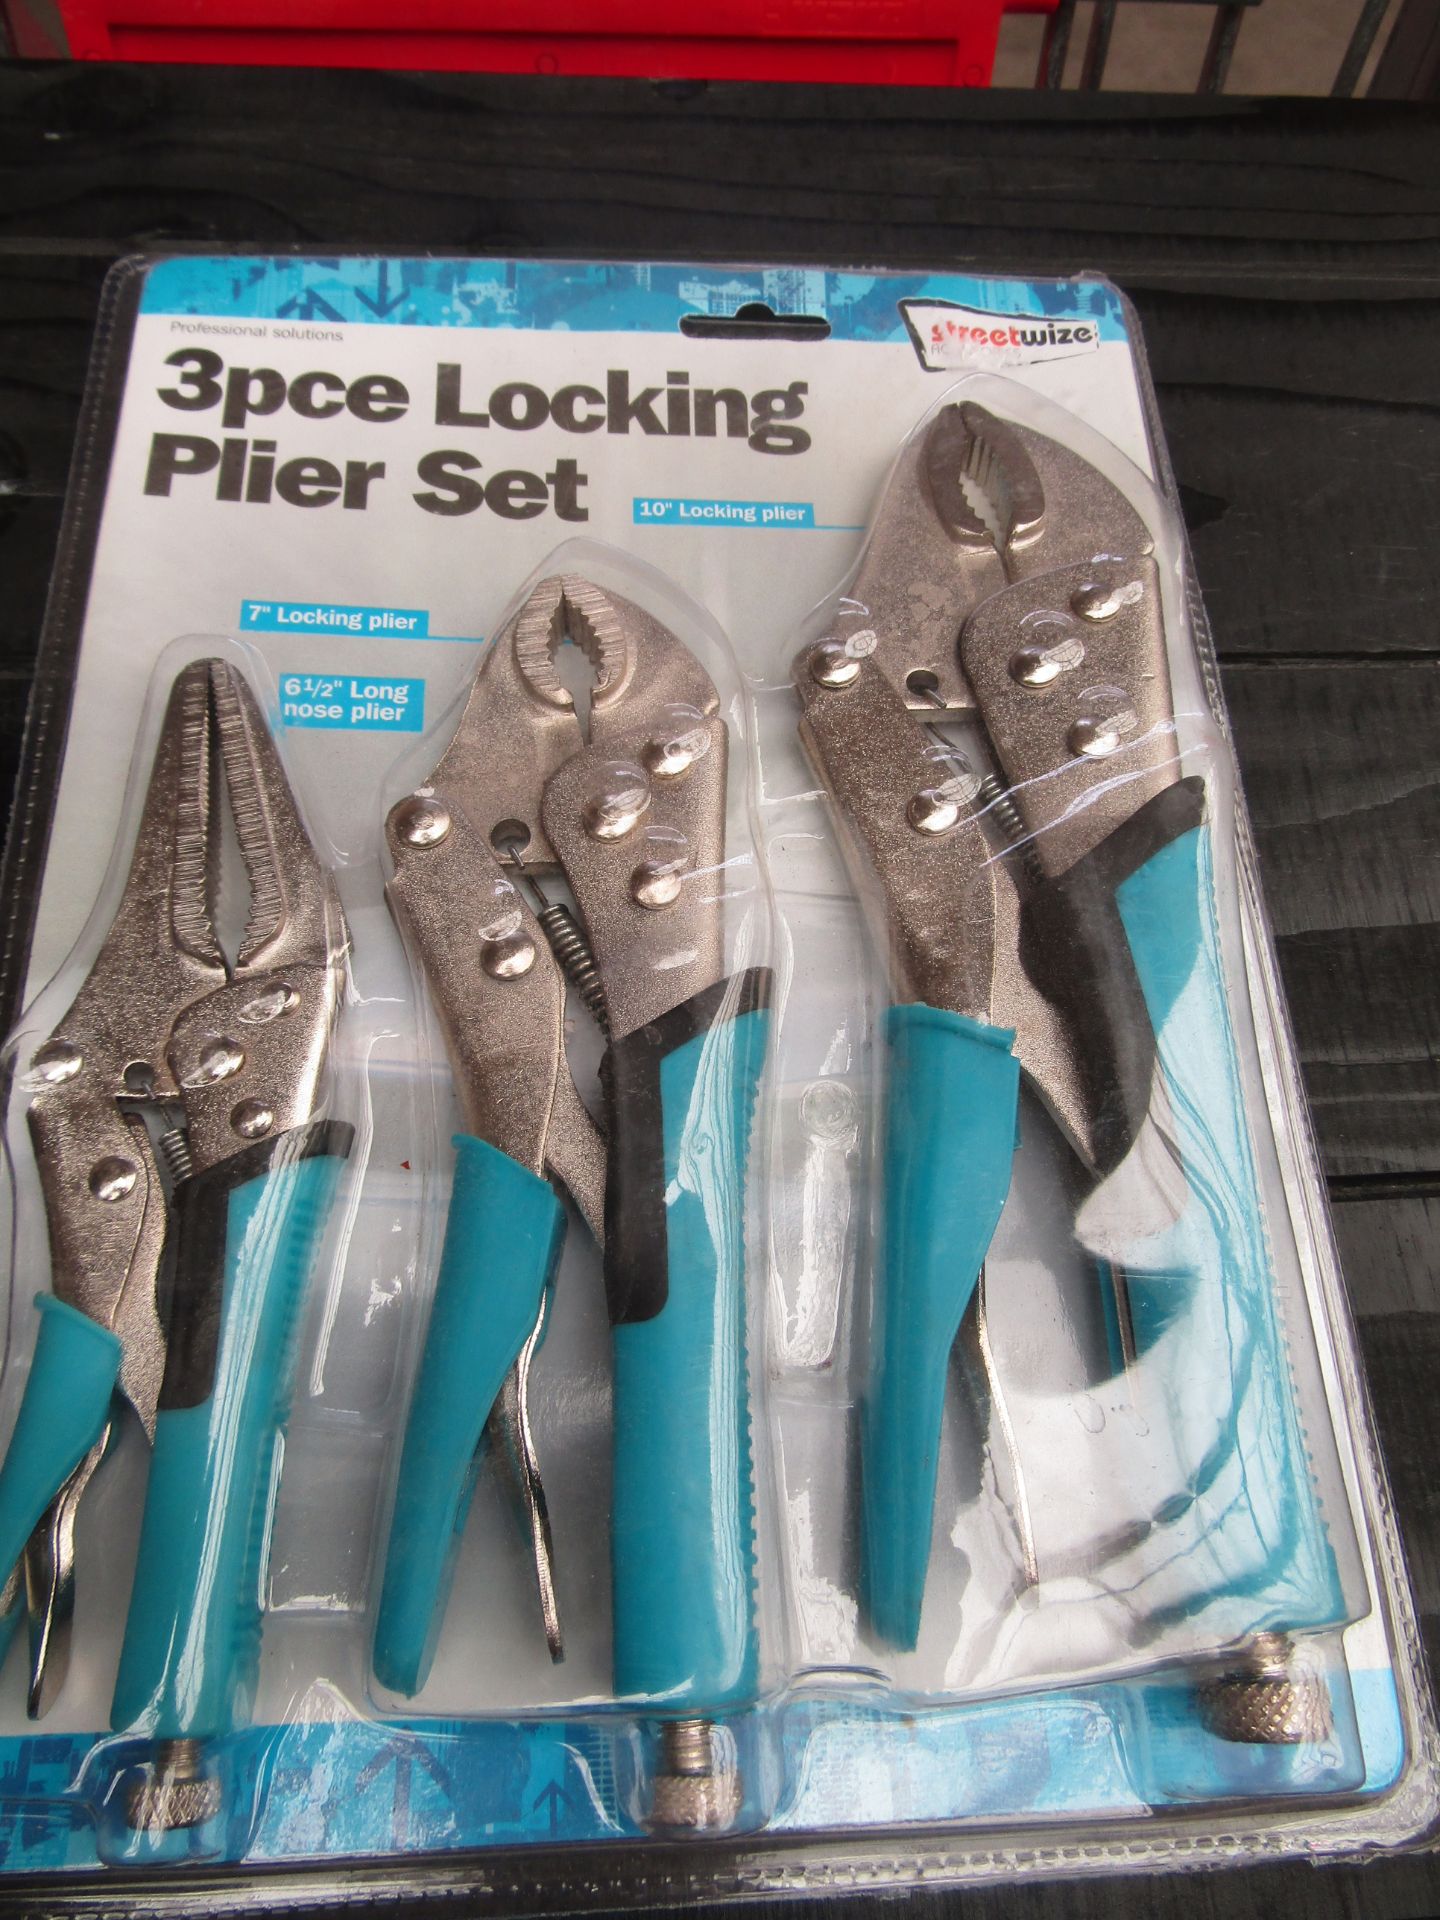 Streetwise set of 3 Locking Plier sets, new and still blister packed